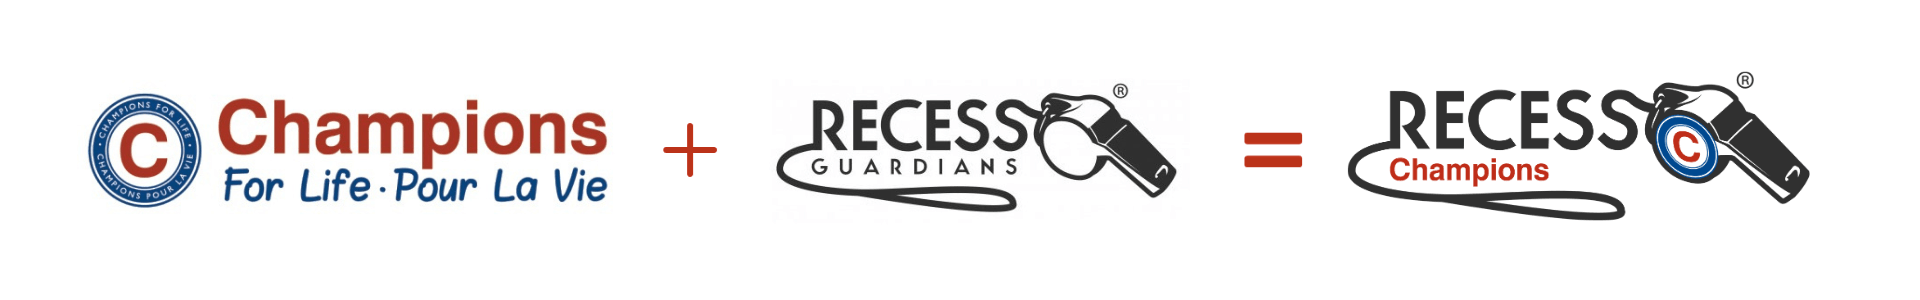 Champions for Life and Recess Guardians team up to create RECESS Champions